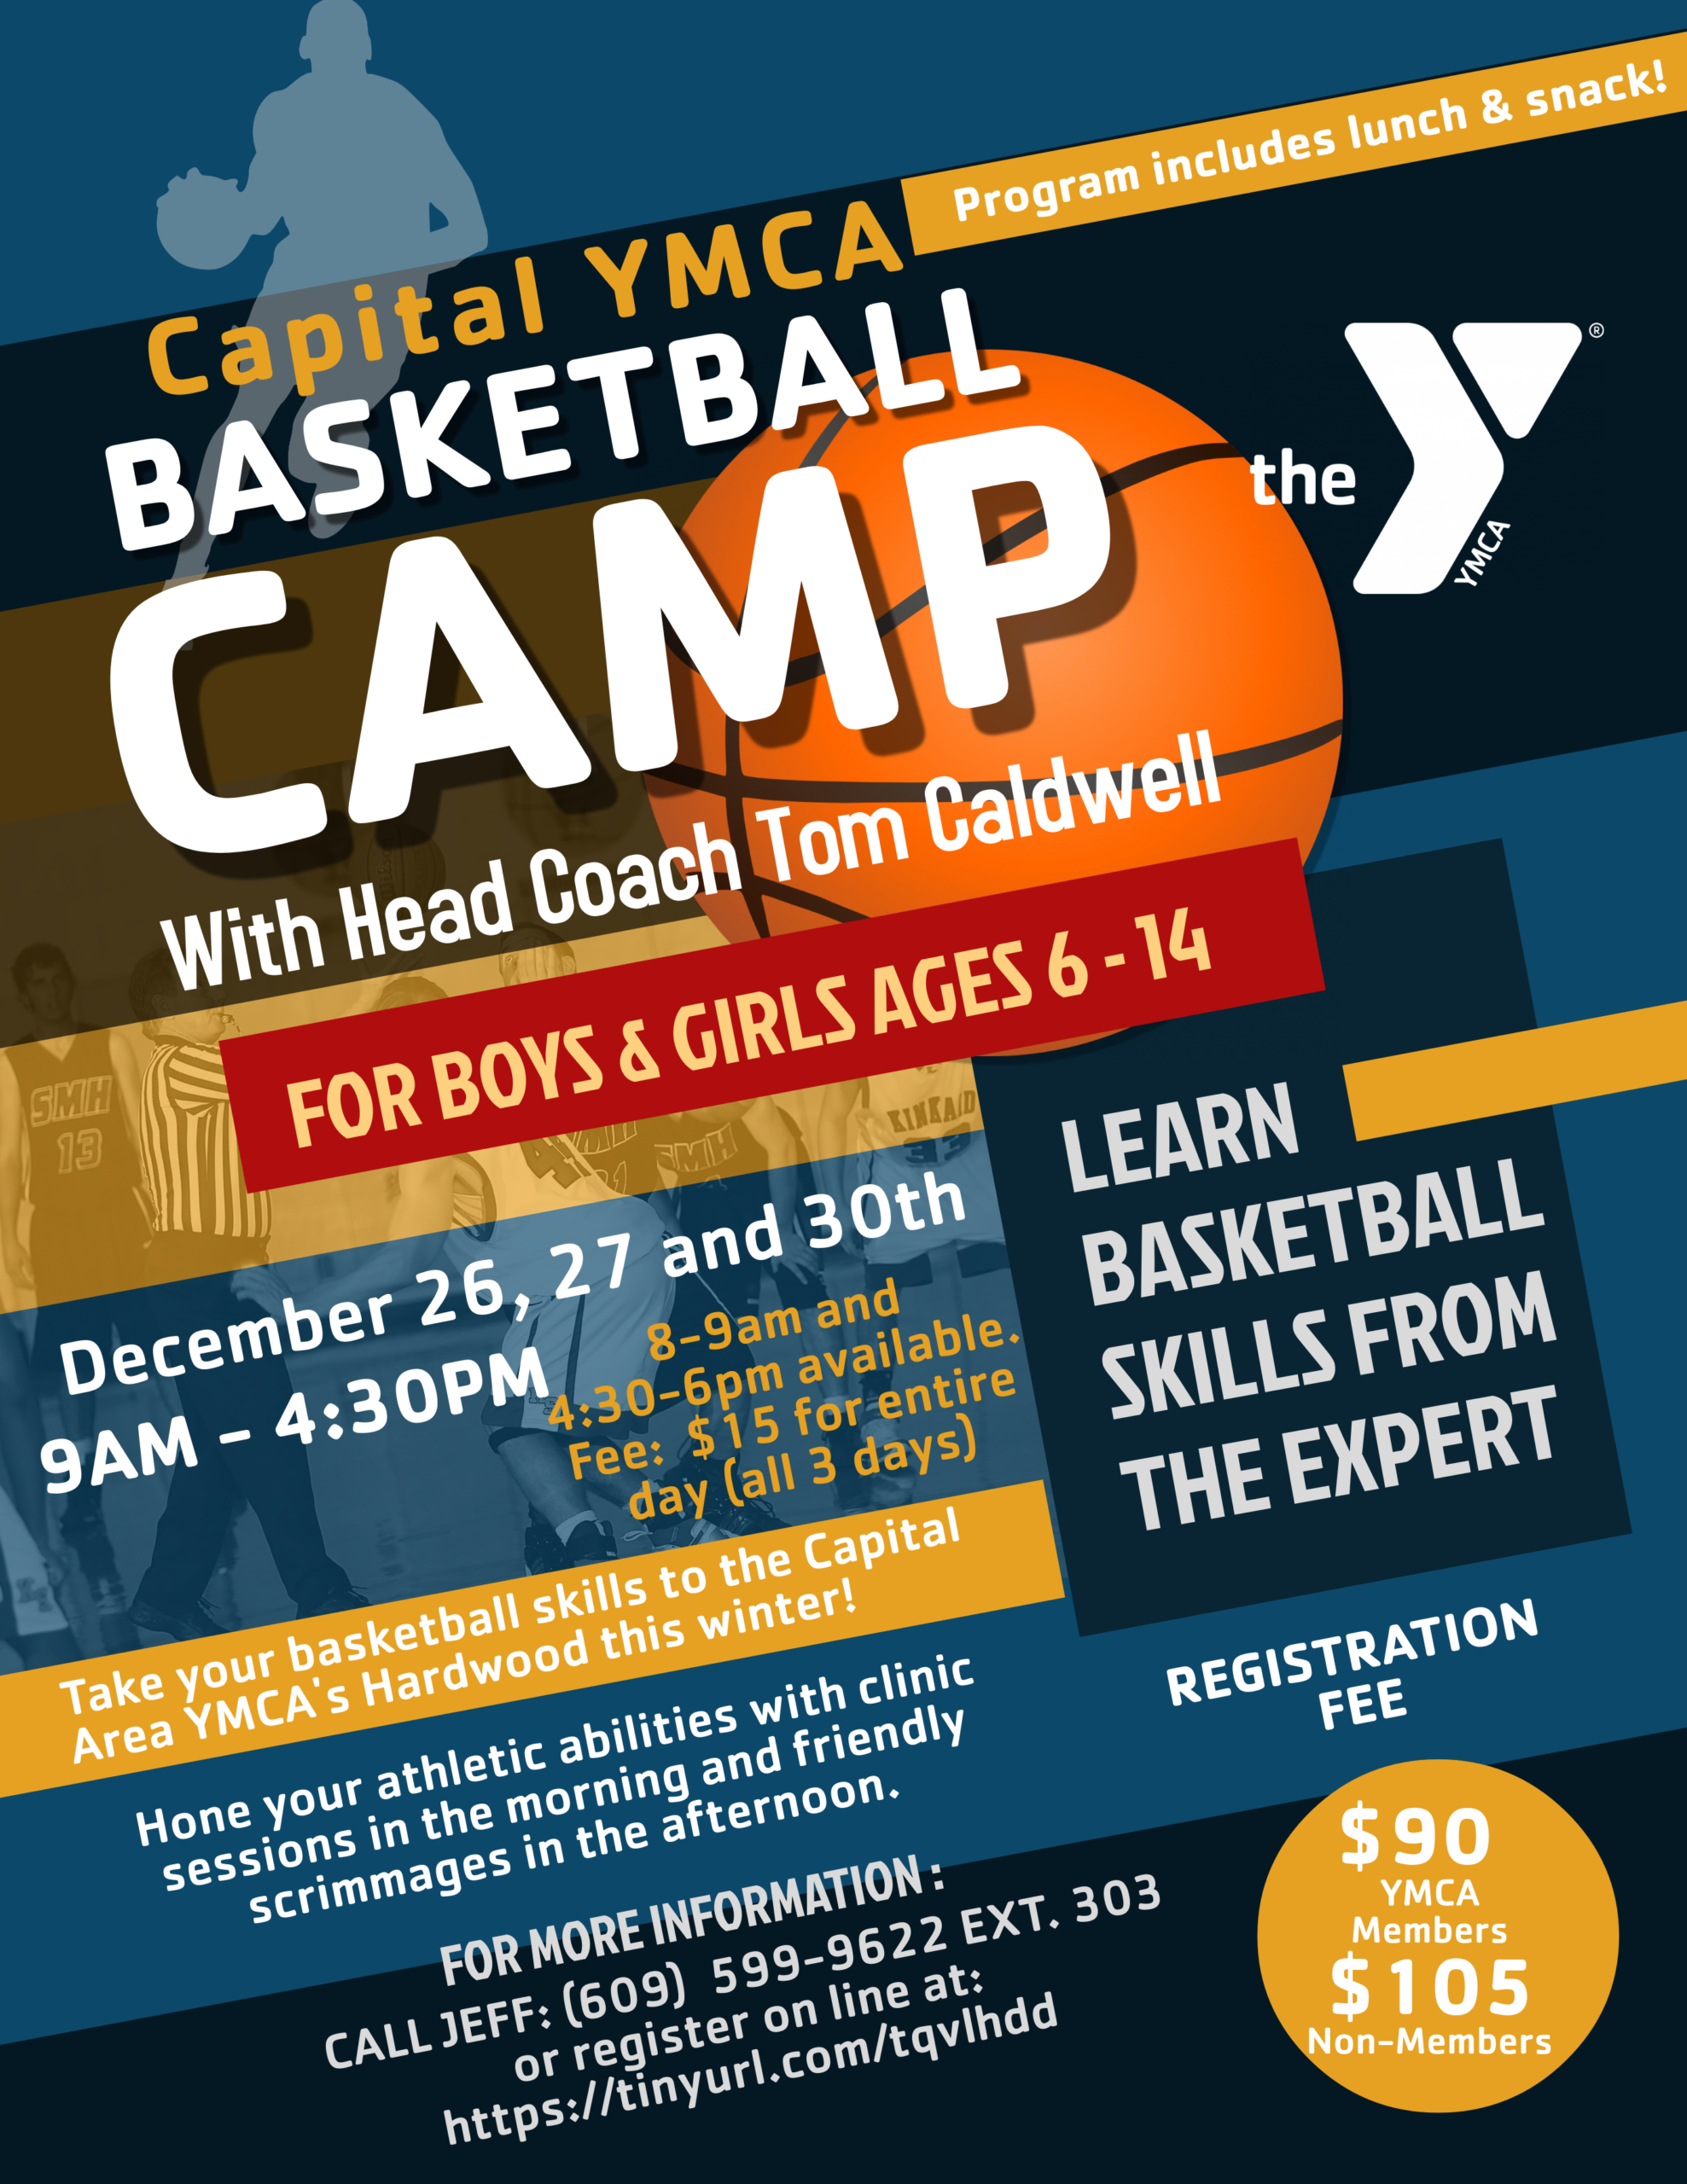 Winter Youth Basketball Camp Capital Area YMCA